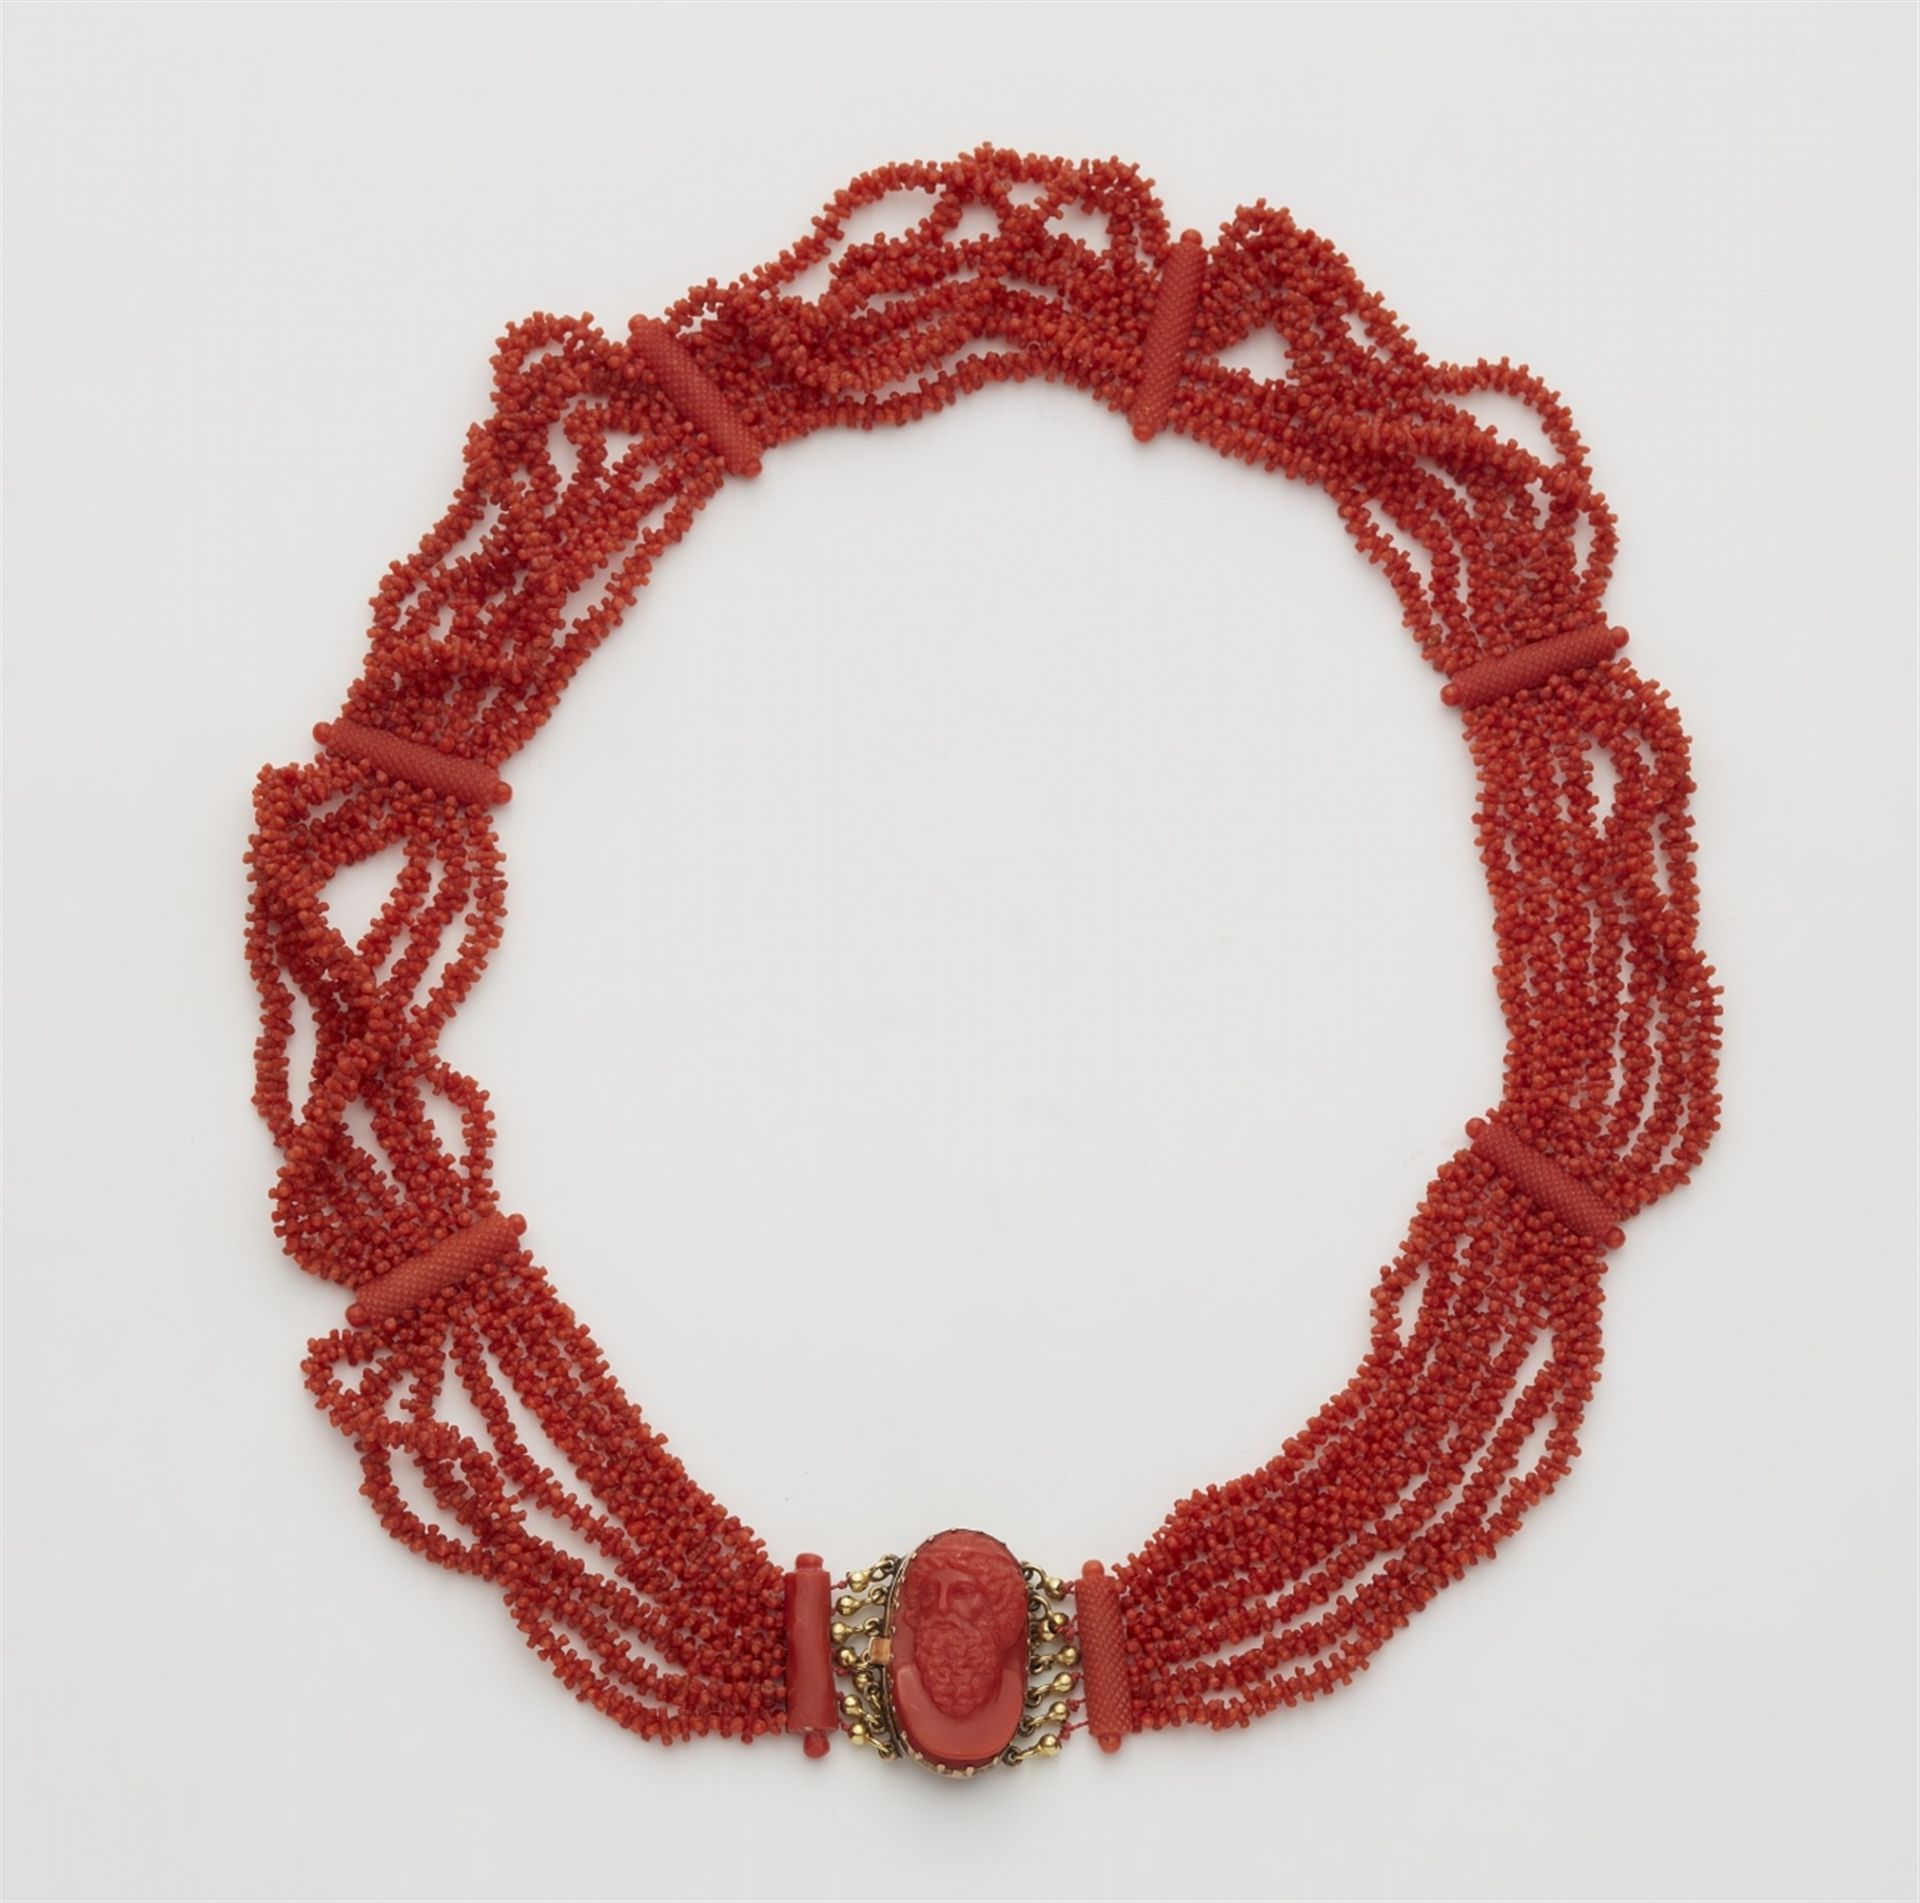 A 14k red gold coral necklace with a shell cameo clasp